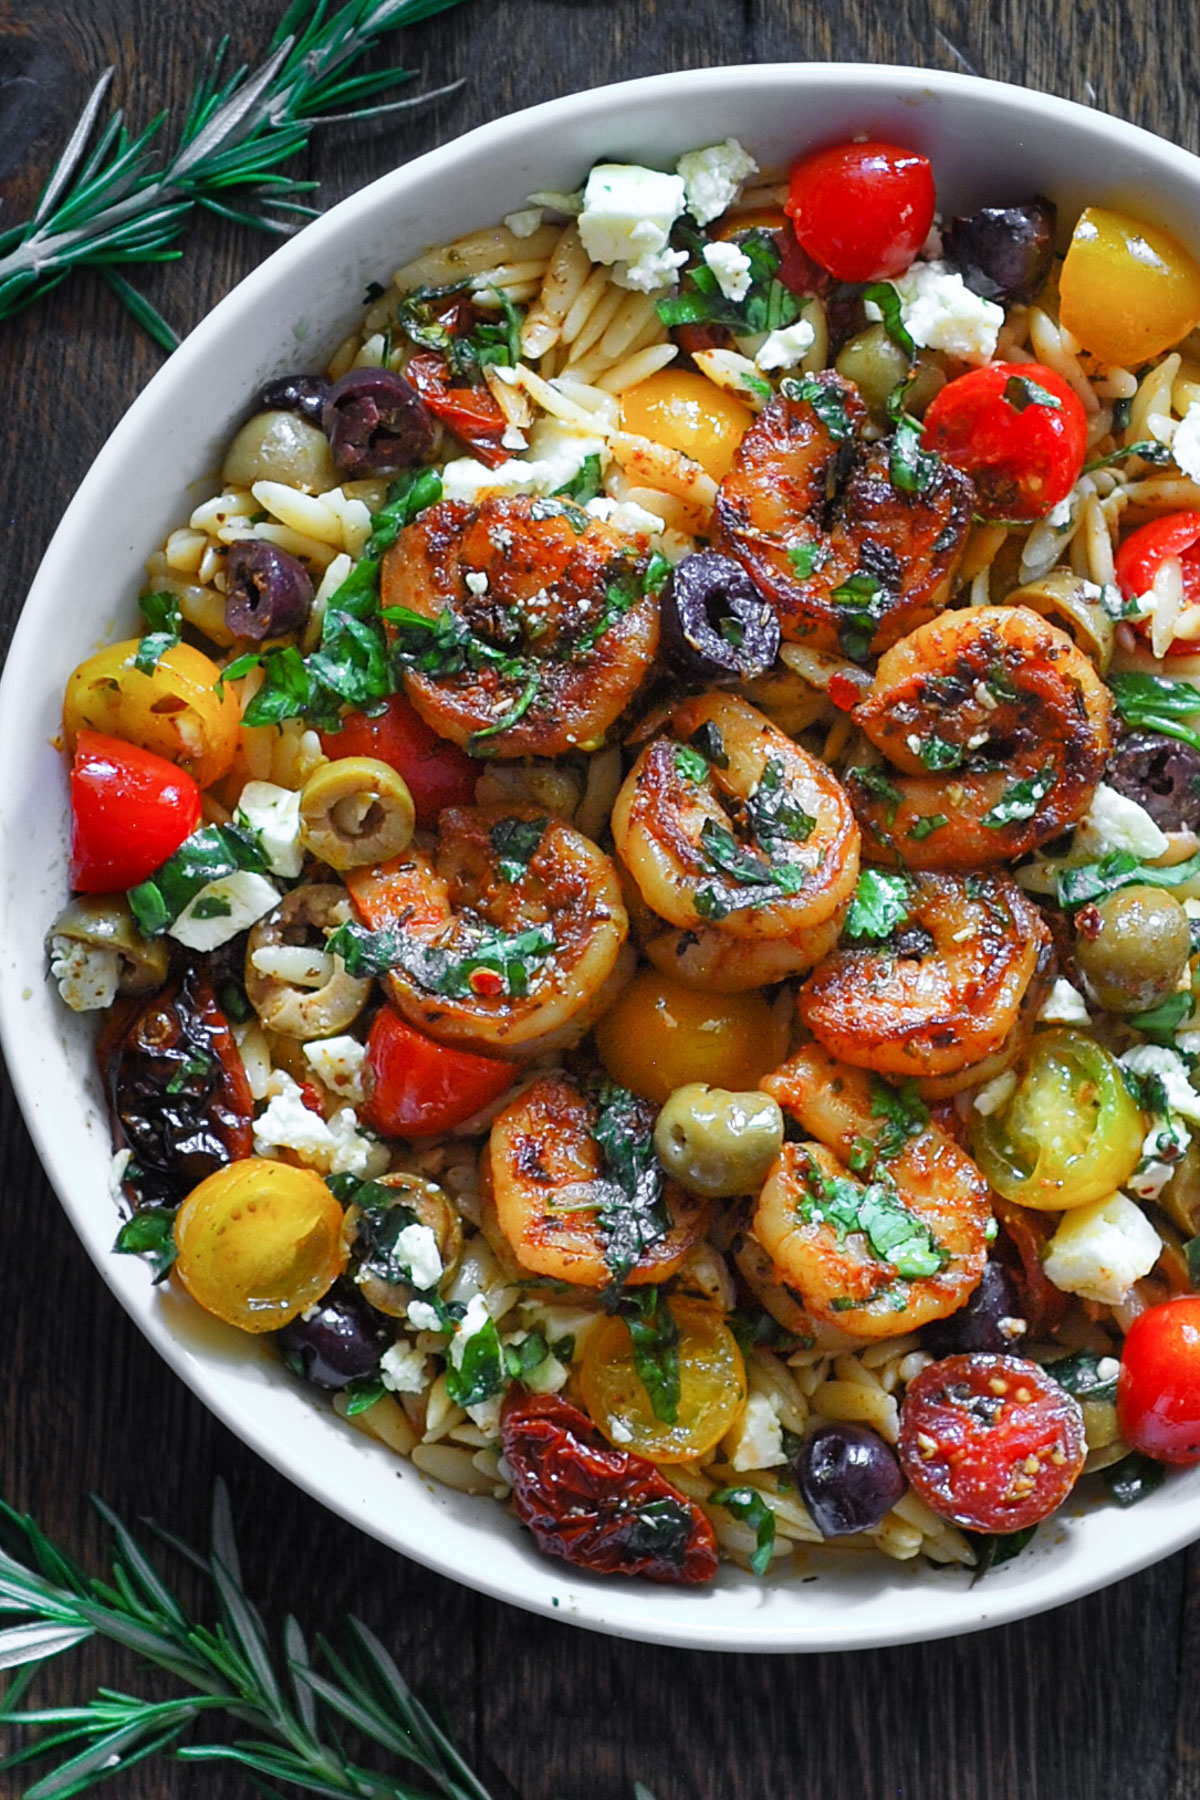 Greek Shrimp with Orzo, Feta, Olives, Sun-Dried Tomatoes, Cherry Tomatoes - in a white bowl.